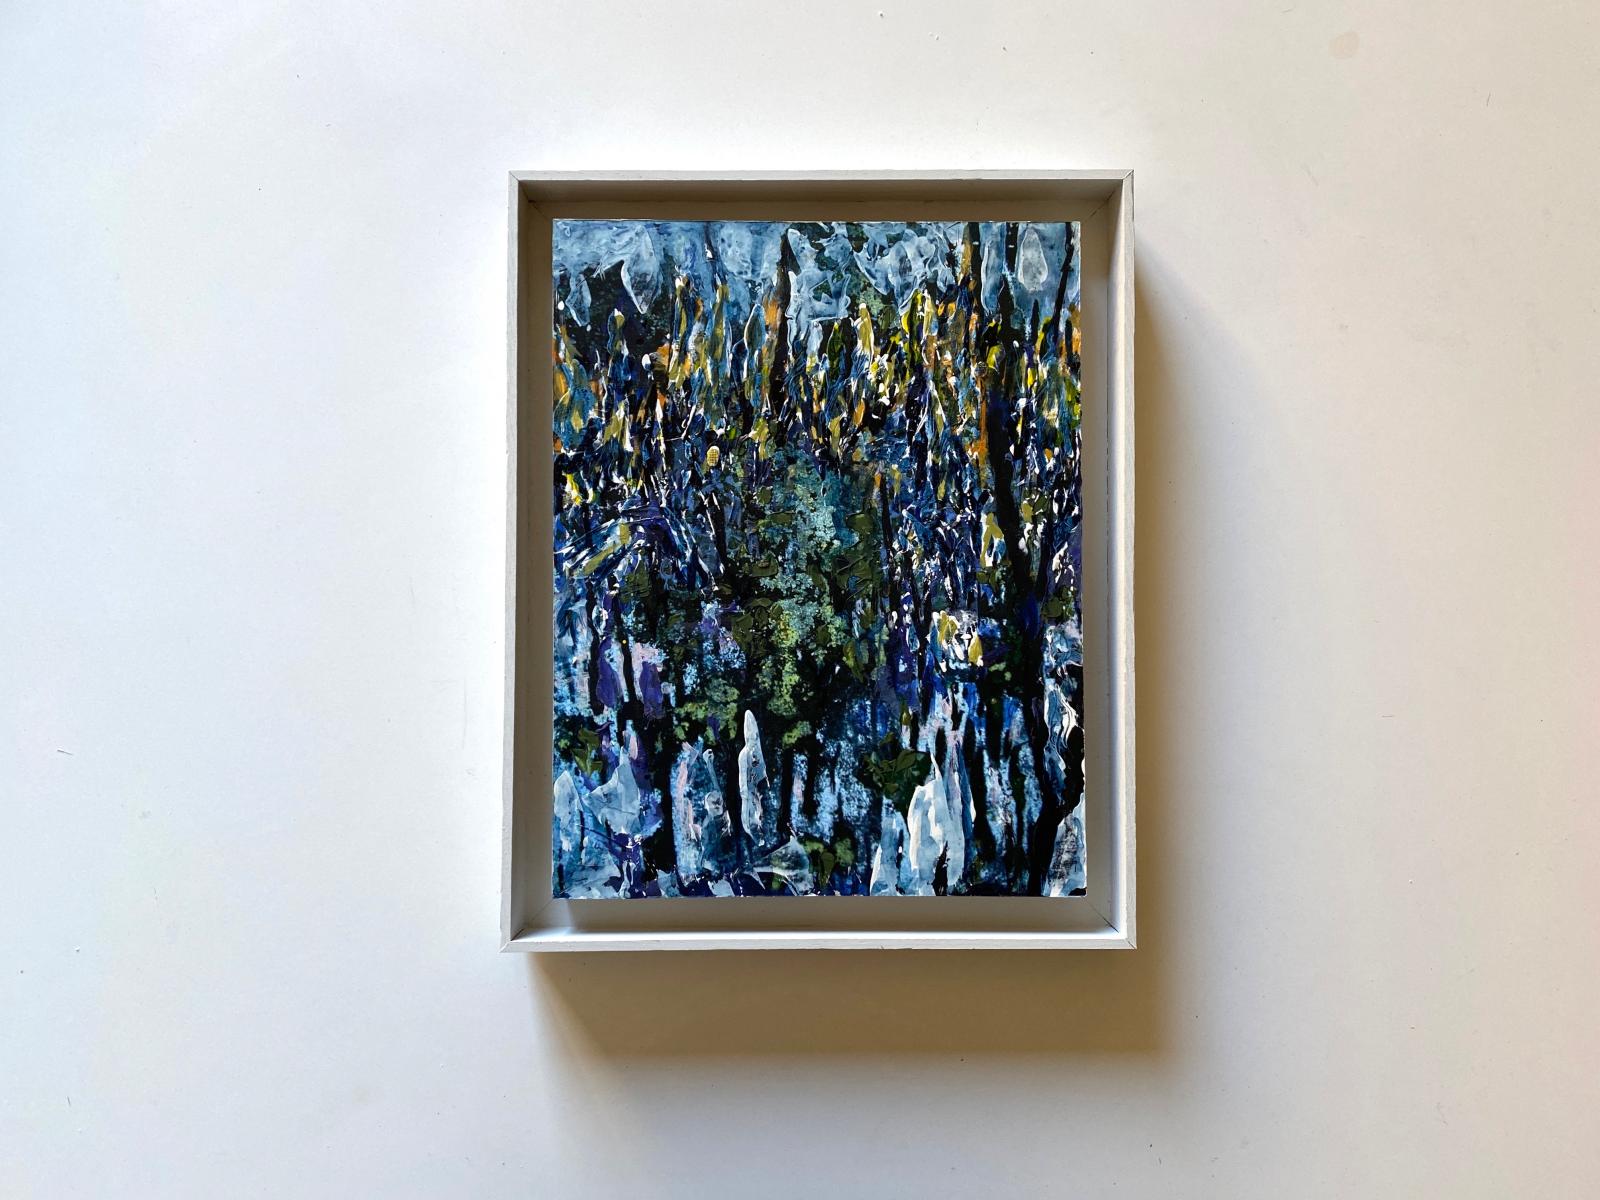 ORIGINS | "Larch and Blue Spruce" | Scale view with artist's frame